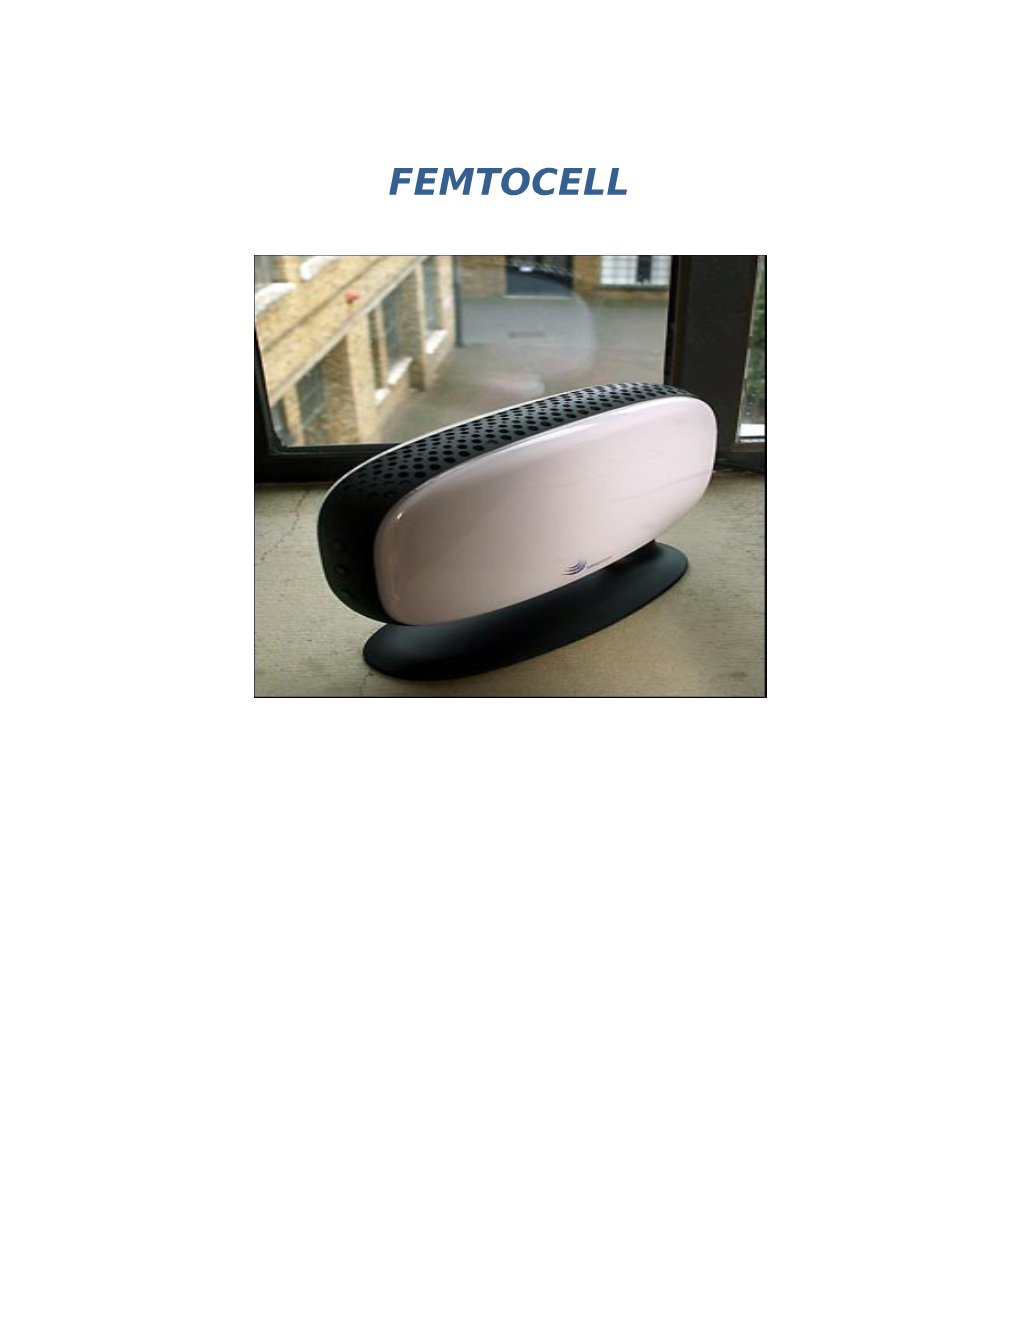 FEMTOCELL Table of Contents Evolution of Femtocell